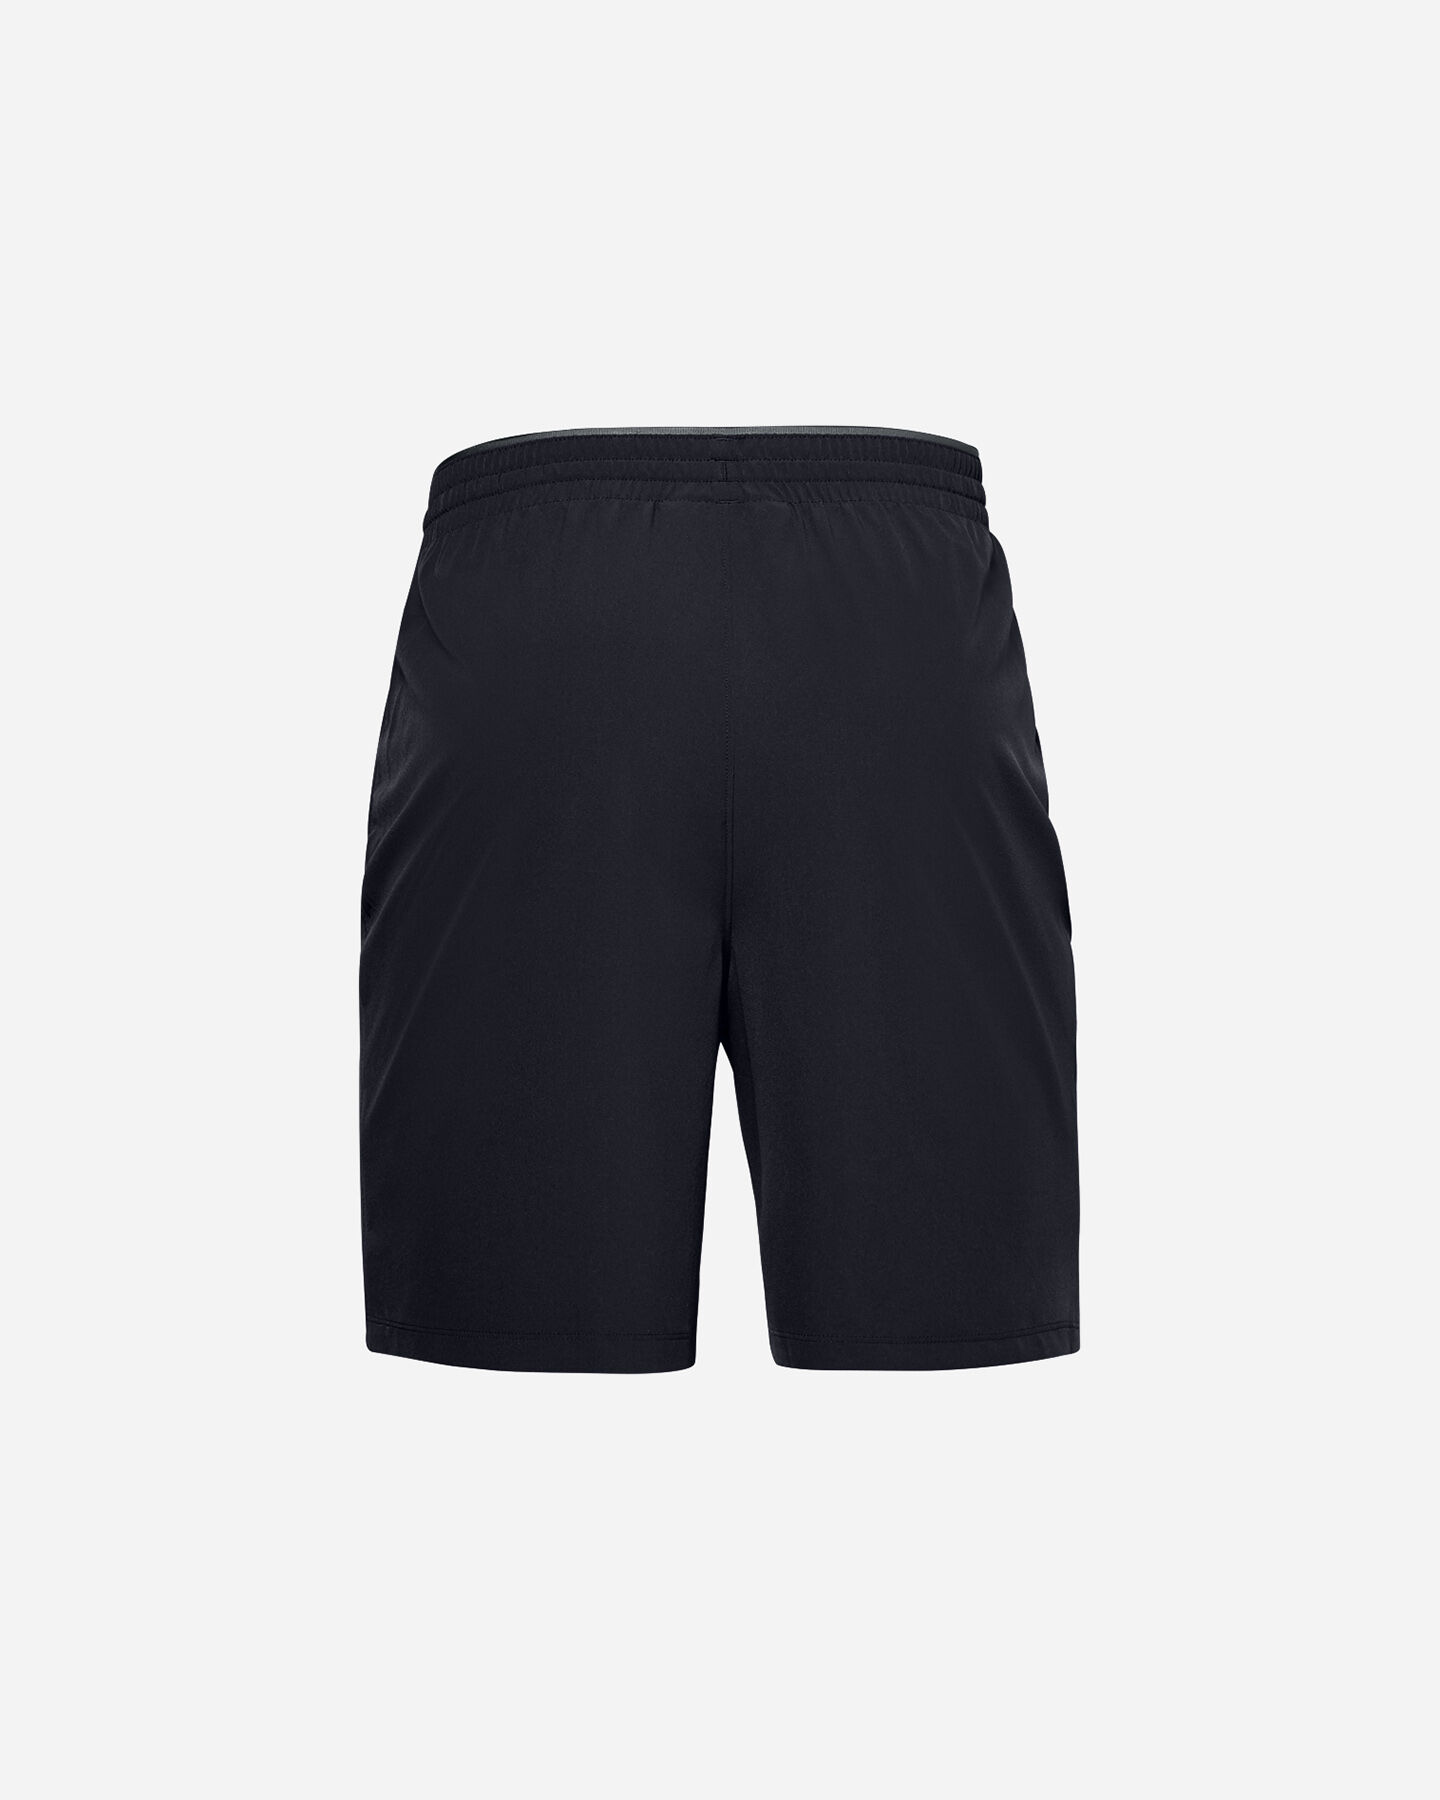  Pantalone training UNDER ARMOUR QUALIFIER WG M S5034893|0002|SM scatto 4